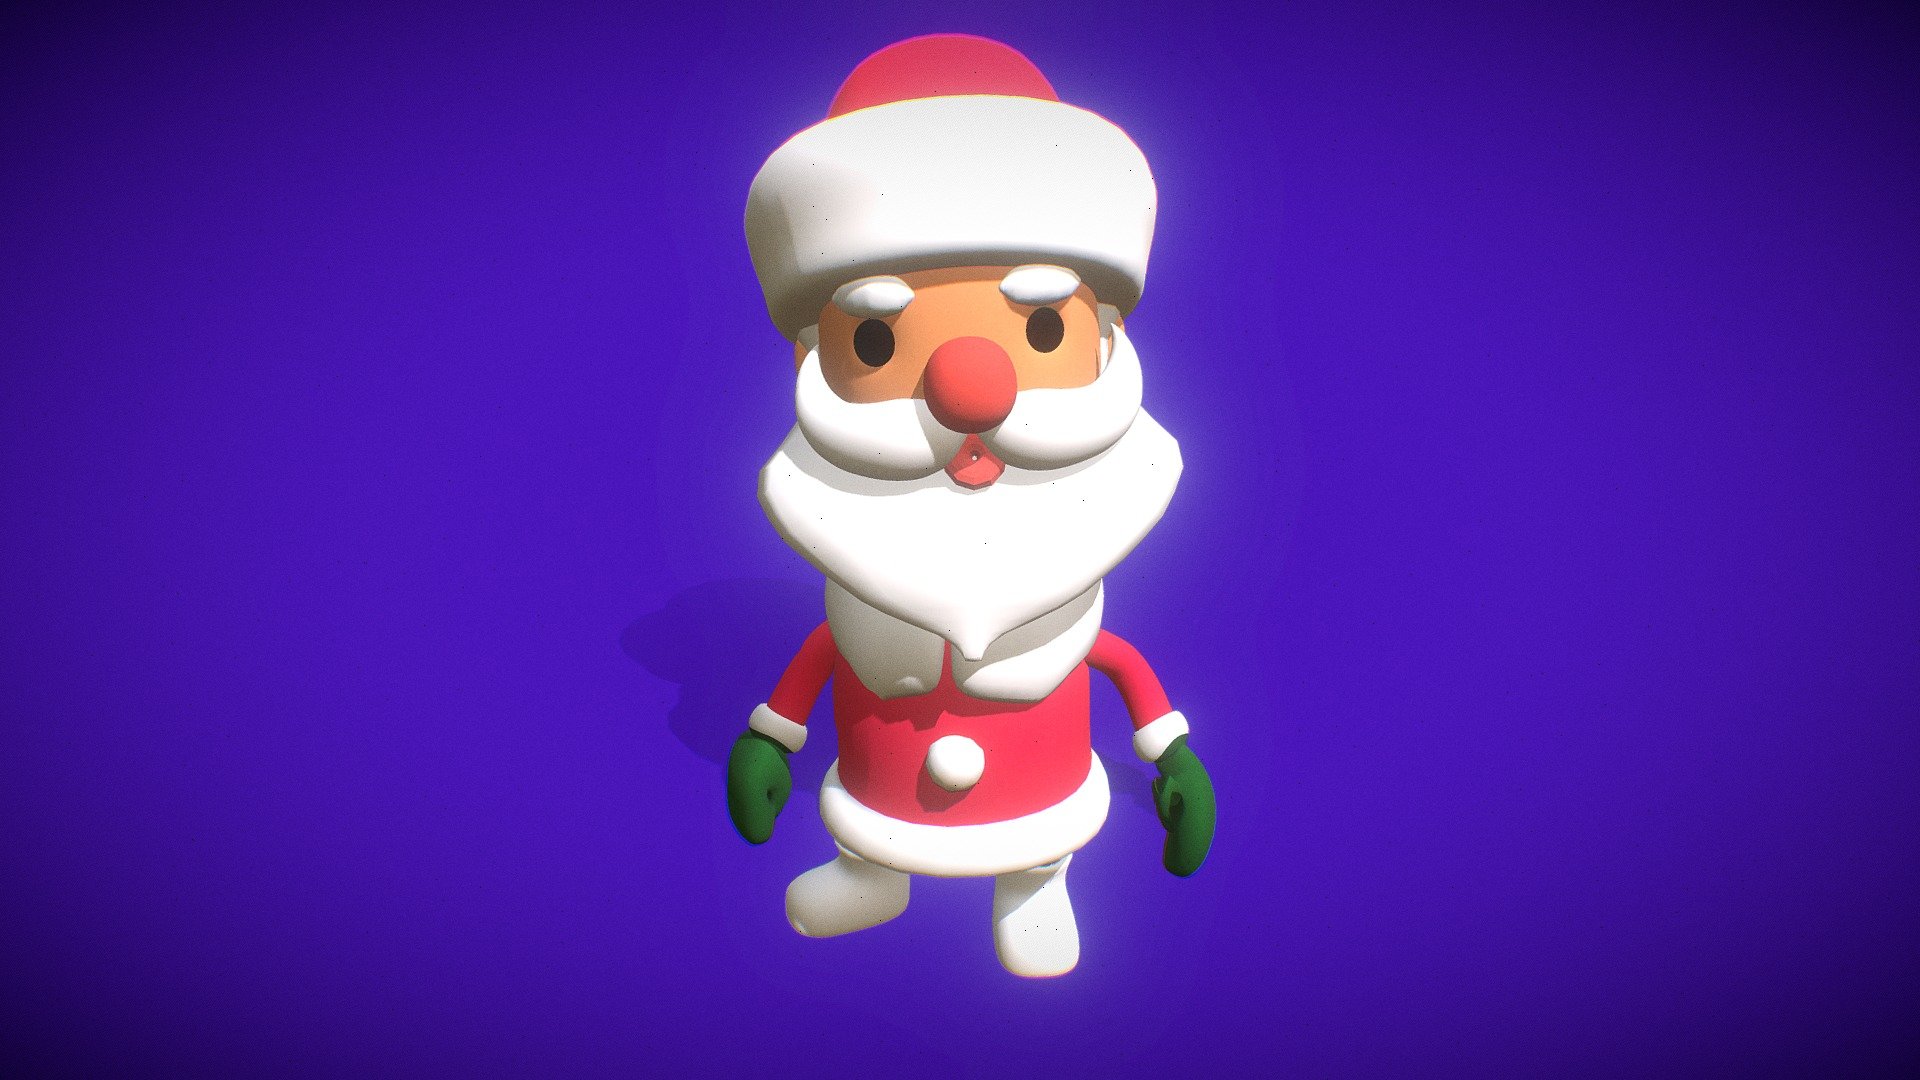 Santa Claus Dancing Animated - Low Poly

Optimized for games (game ready), Suitable for close-UPS, illustrations and various renderings 3d model